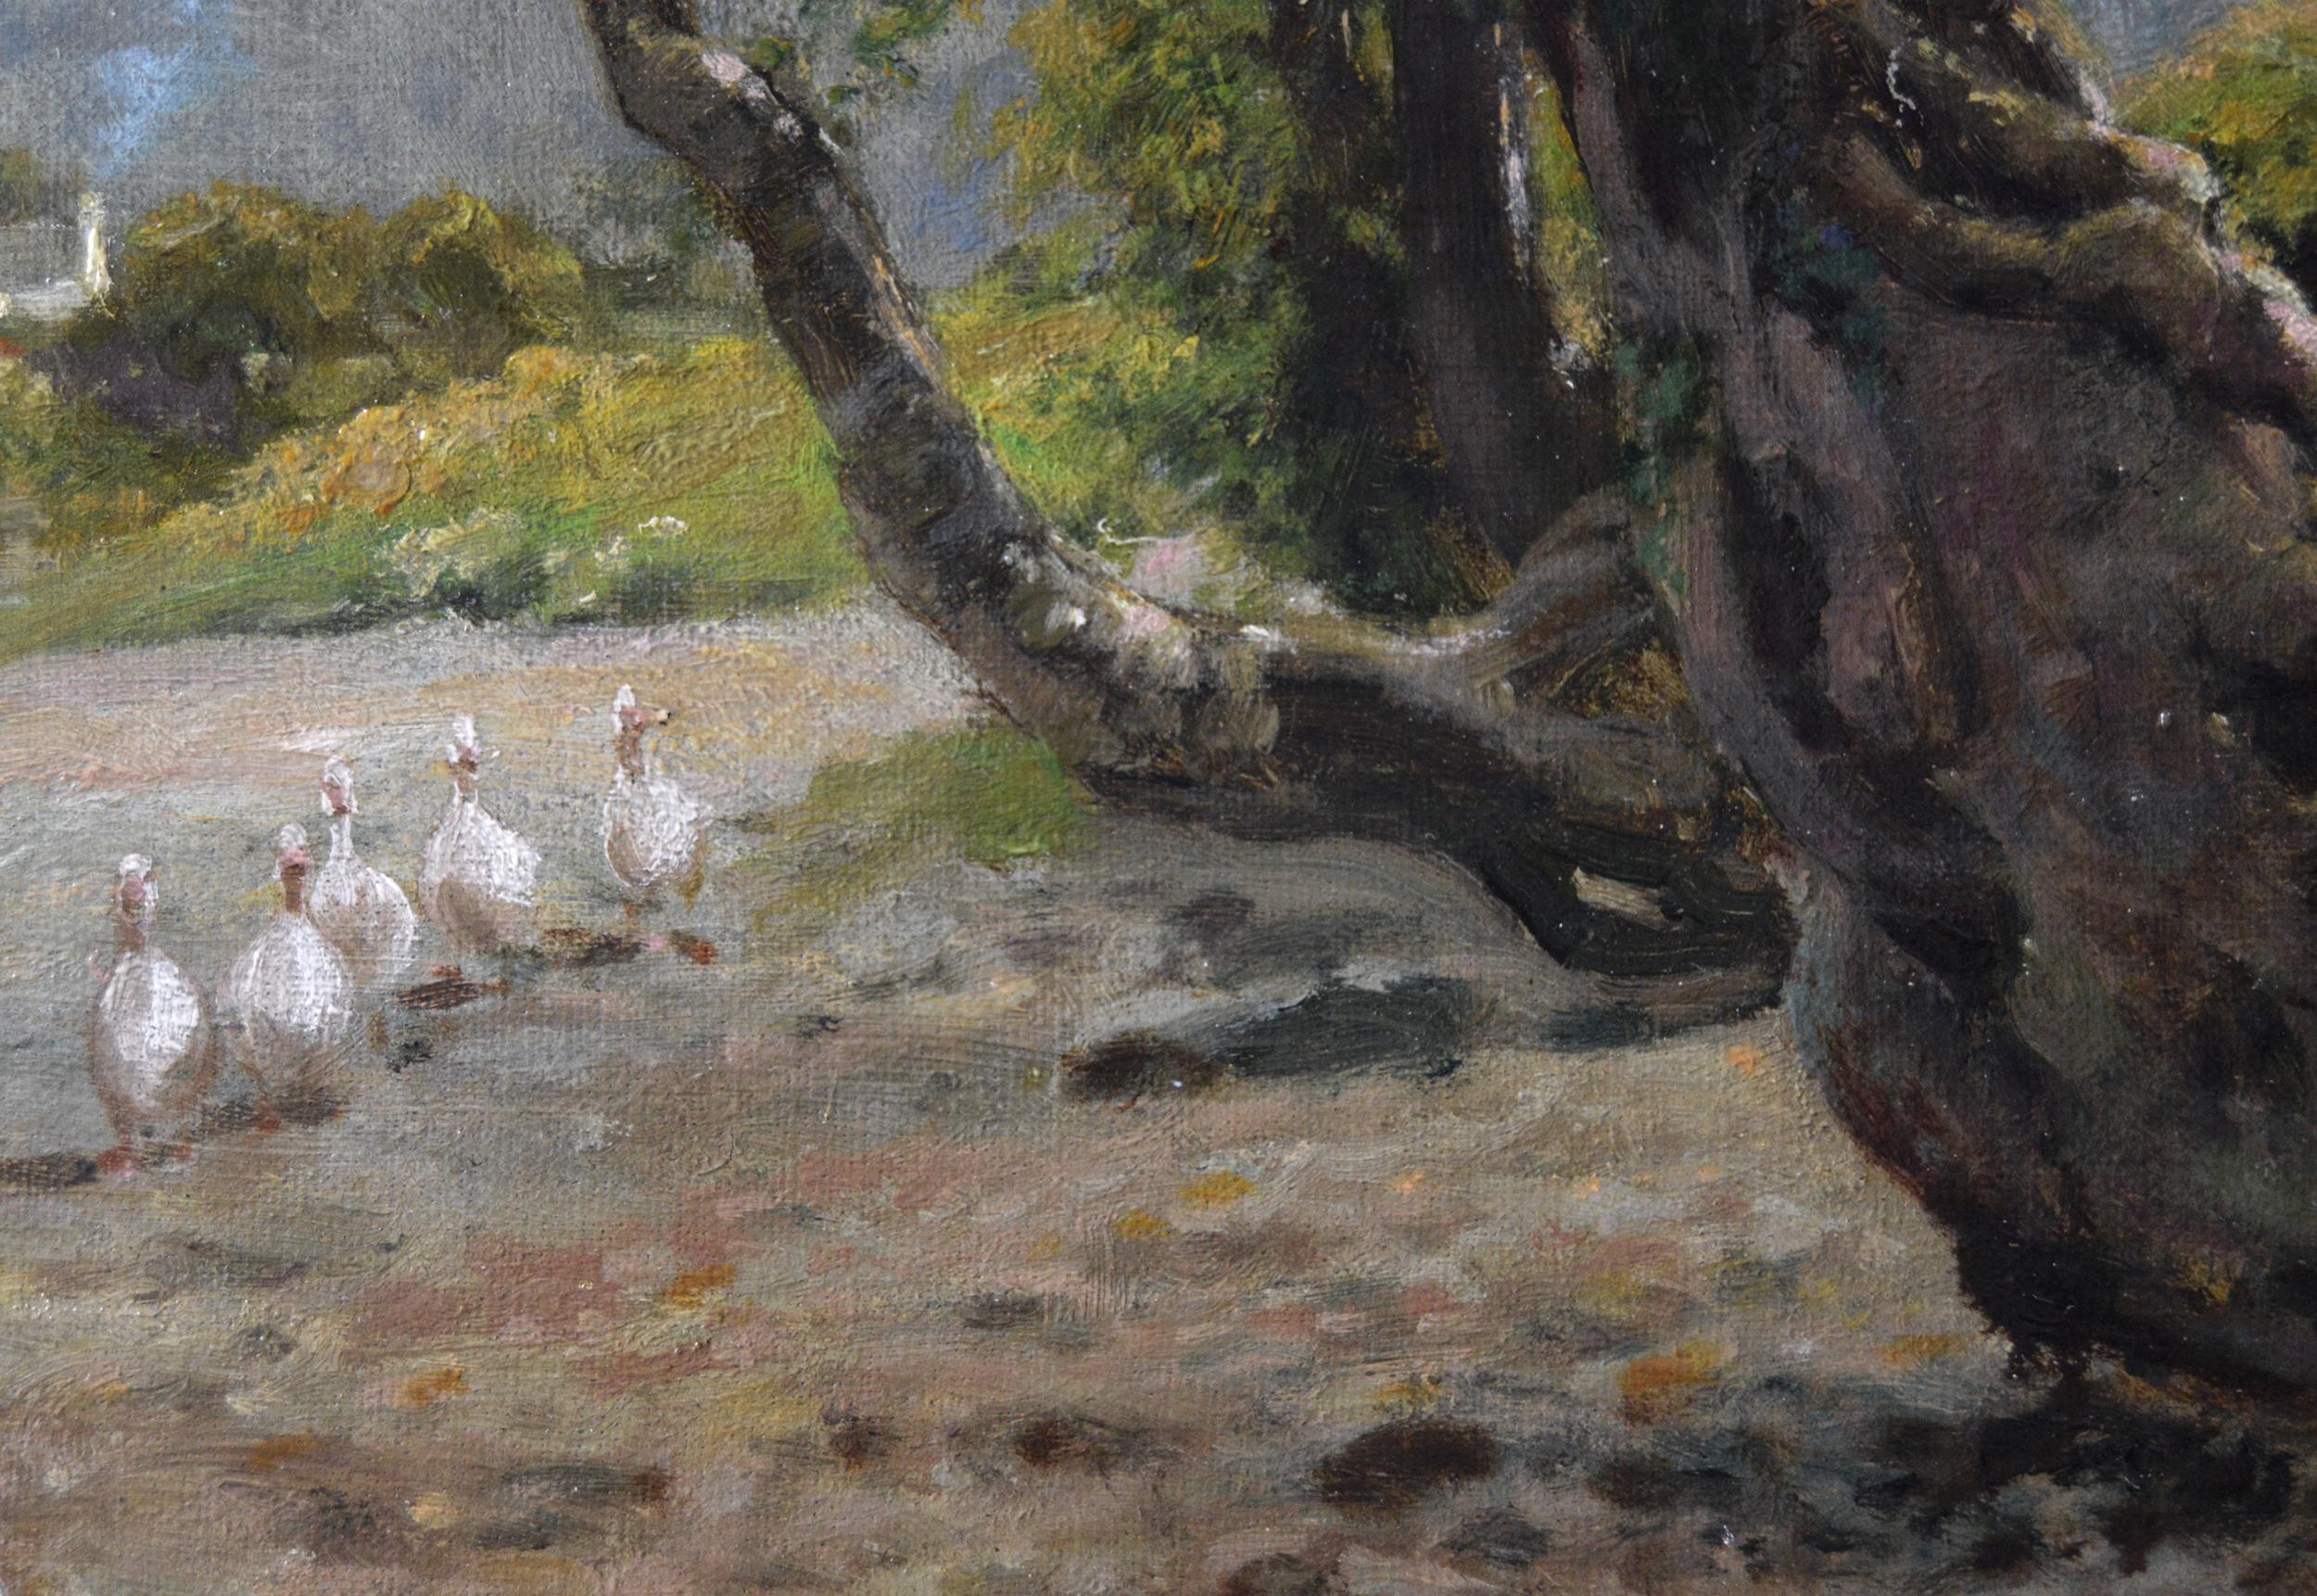 19th Century landscape oil painting of geese by a river - Victorian Painting by Arthur Walker Redgate